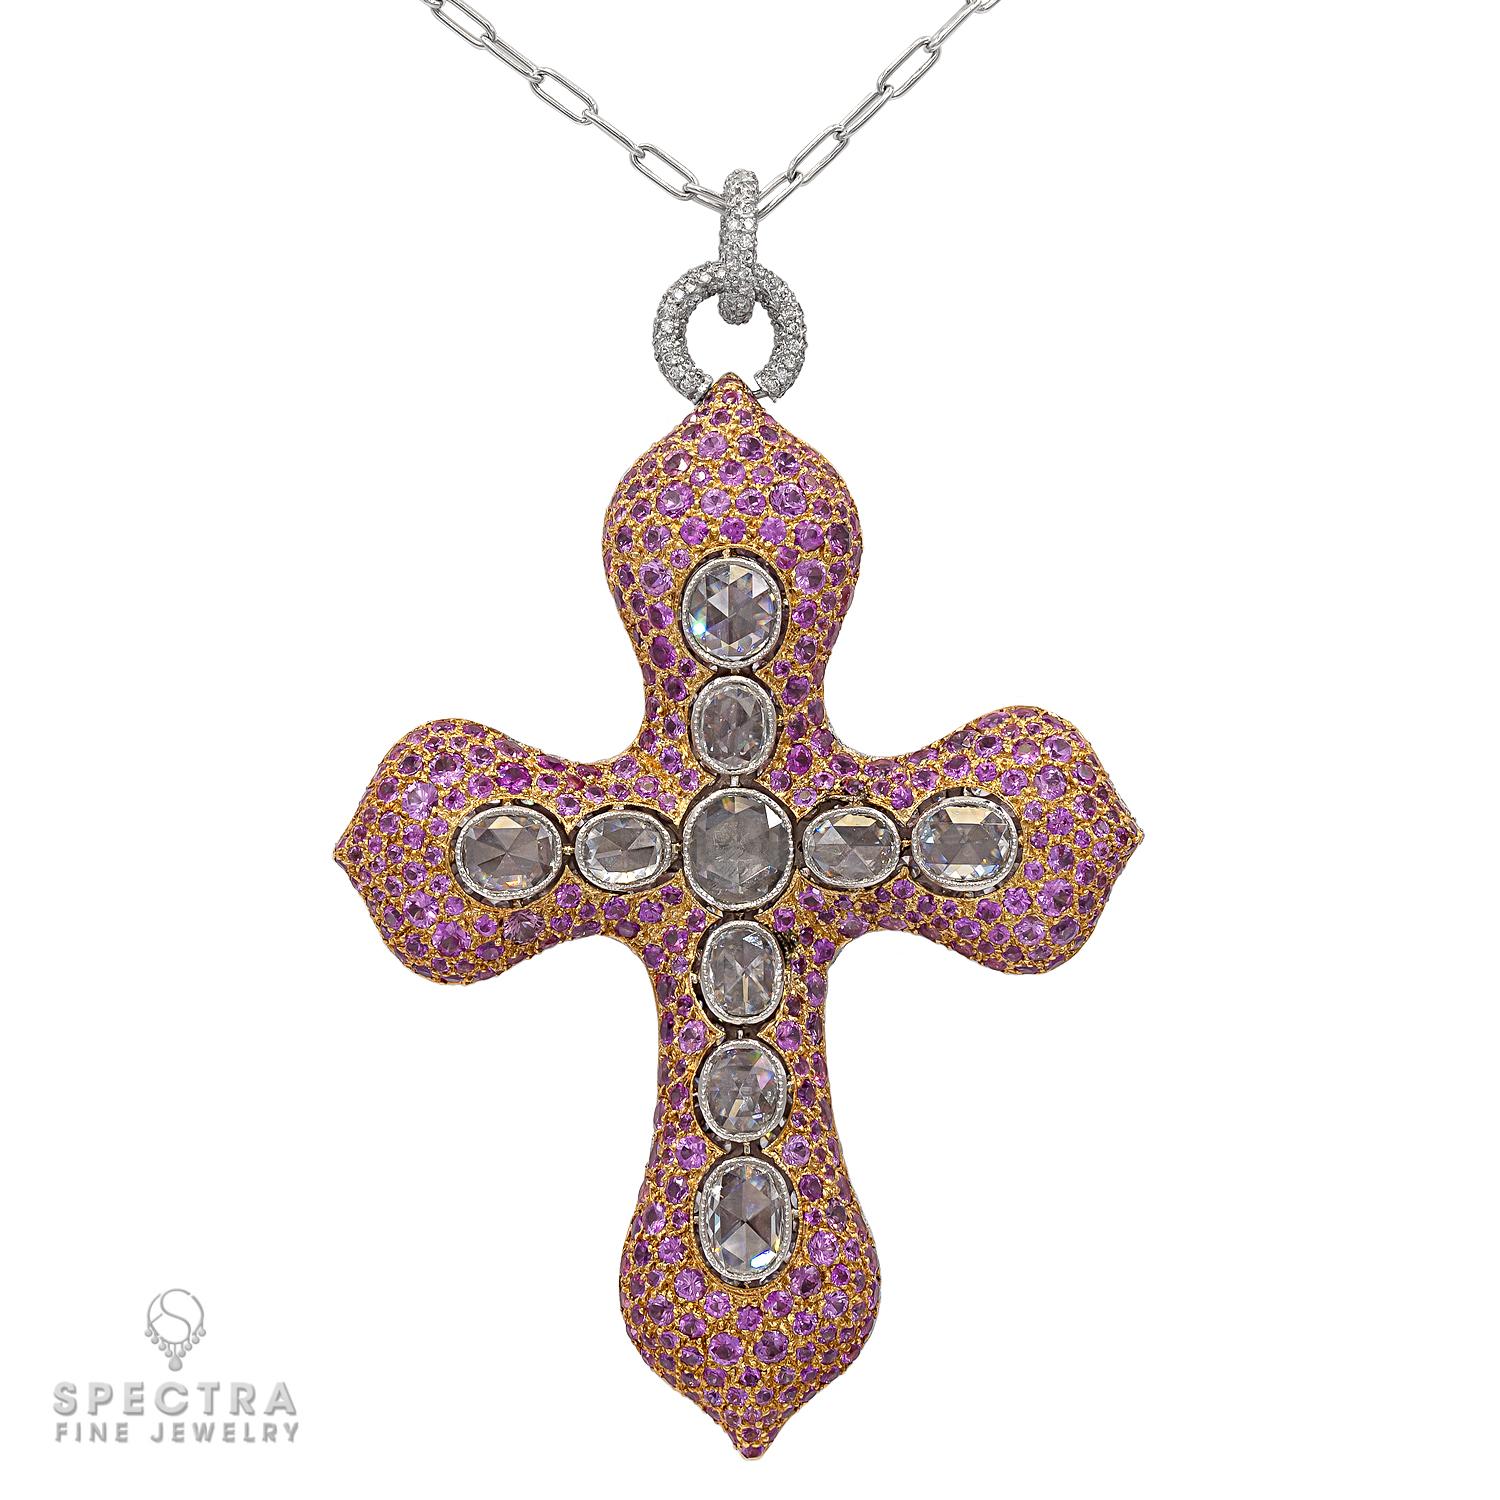 Presenting our stunning reversible Cross Pendant Necklace. Crafted with love and adorned with elegance, this unique piece features 10 conch pearls and white diamonds pave on one side, while flipping it reveals the mesmerizing beauty of 10 rose-cut